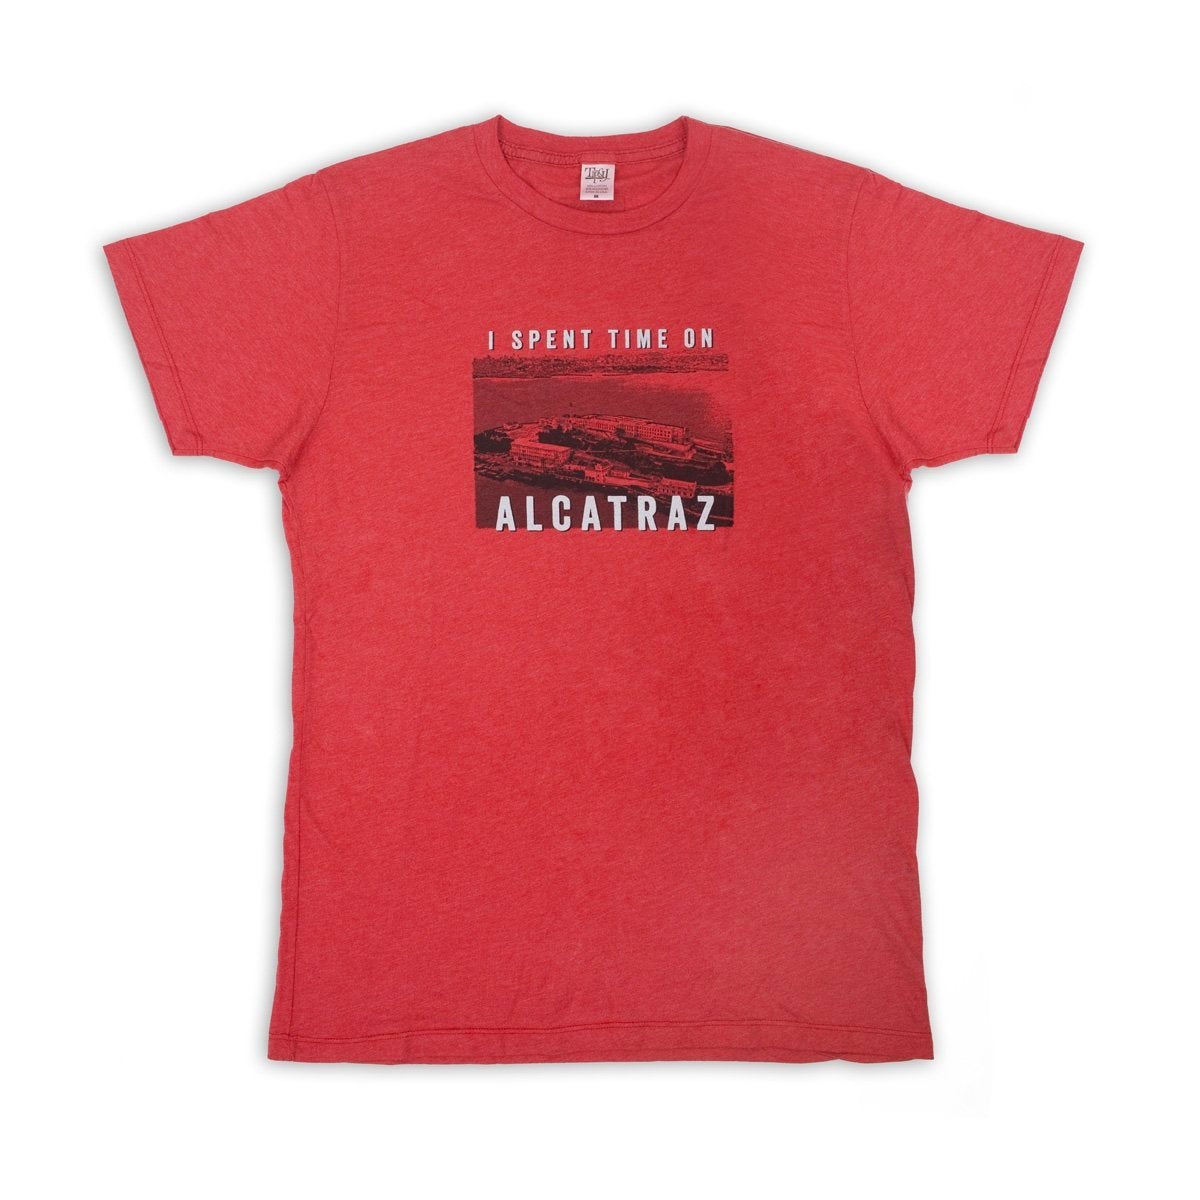 Red crewneck t-shirt with design on chest, vintage aerial photograph of Alcatraz Island in black with words "I Spent Time on Alcatraz" in white.